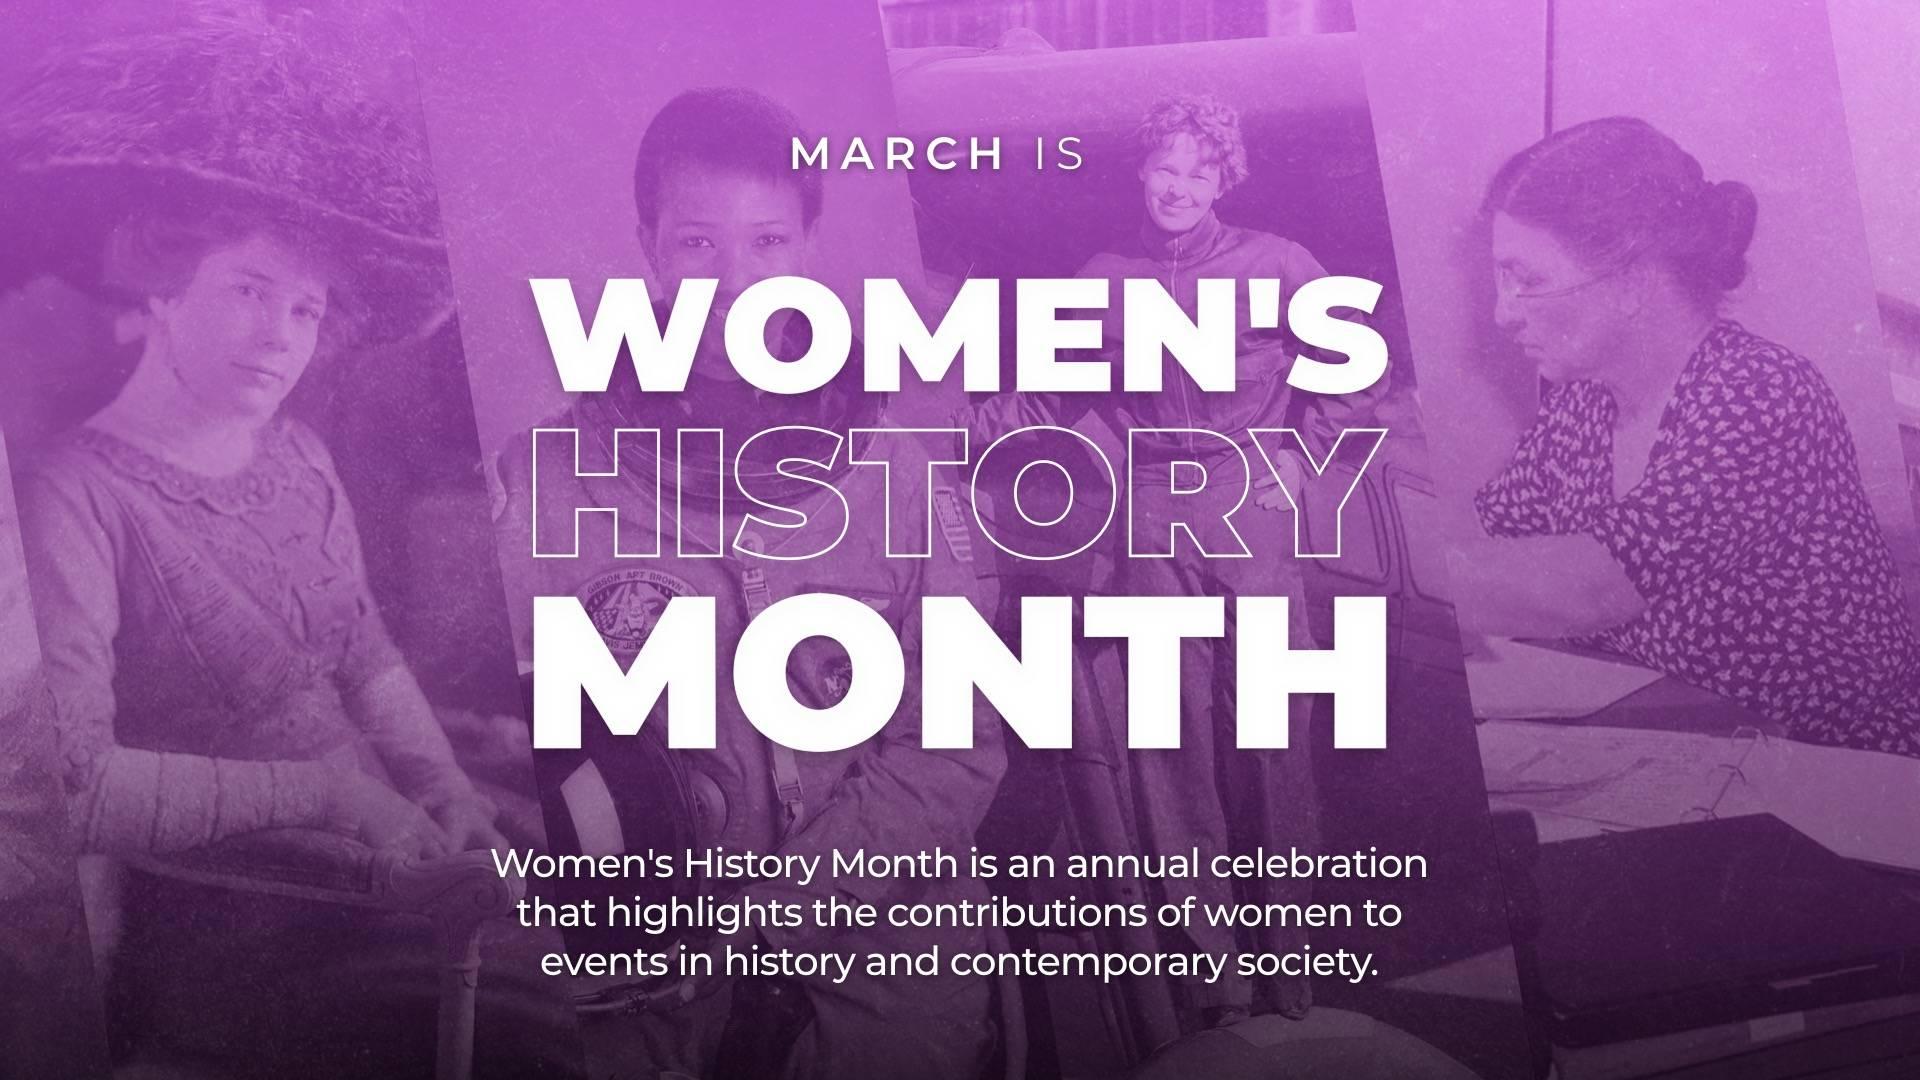 Women's History Month Digital Signage Template